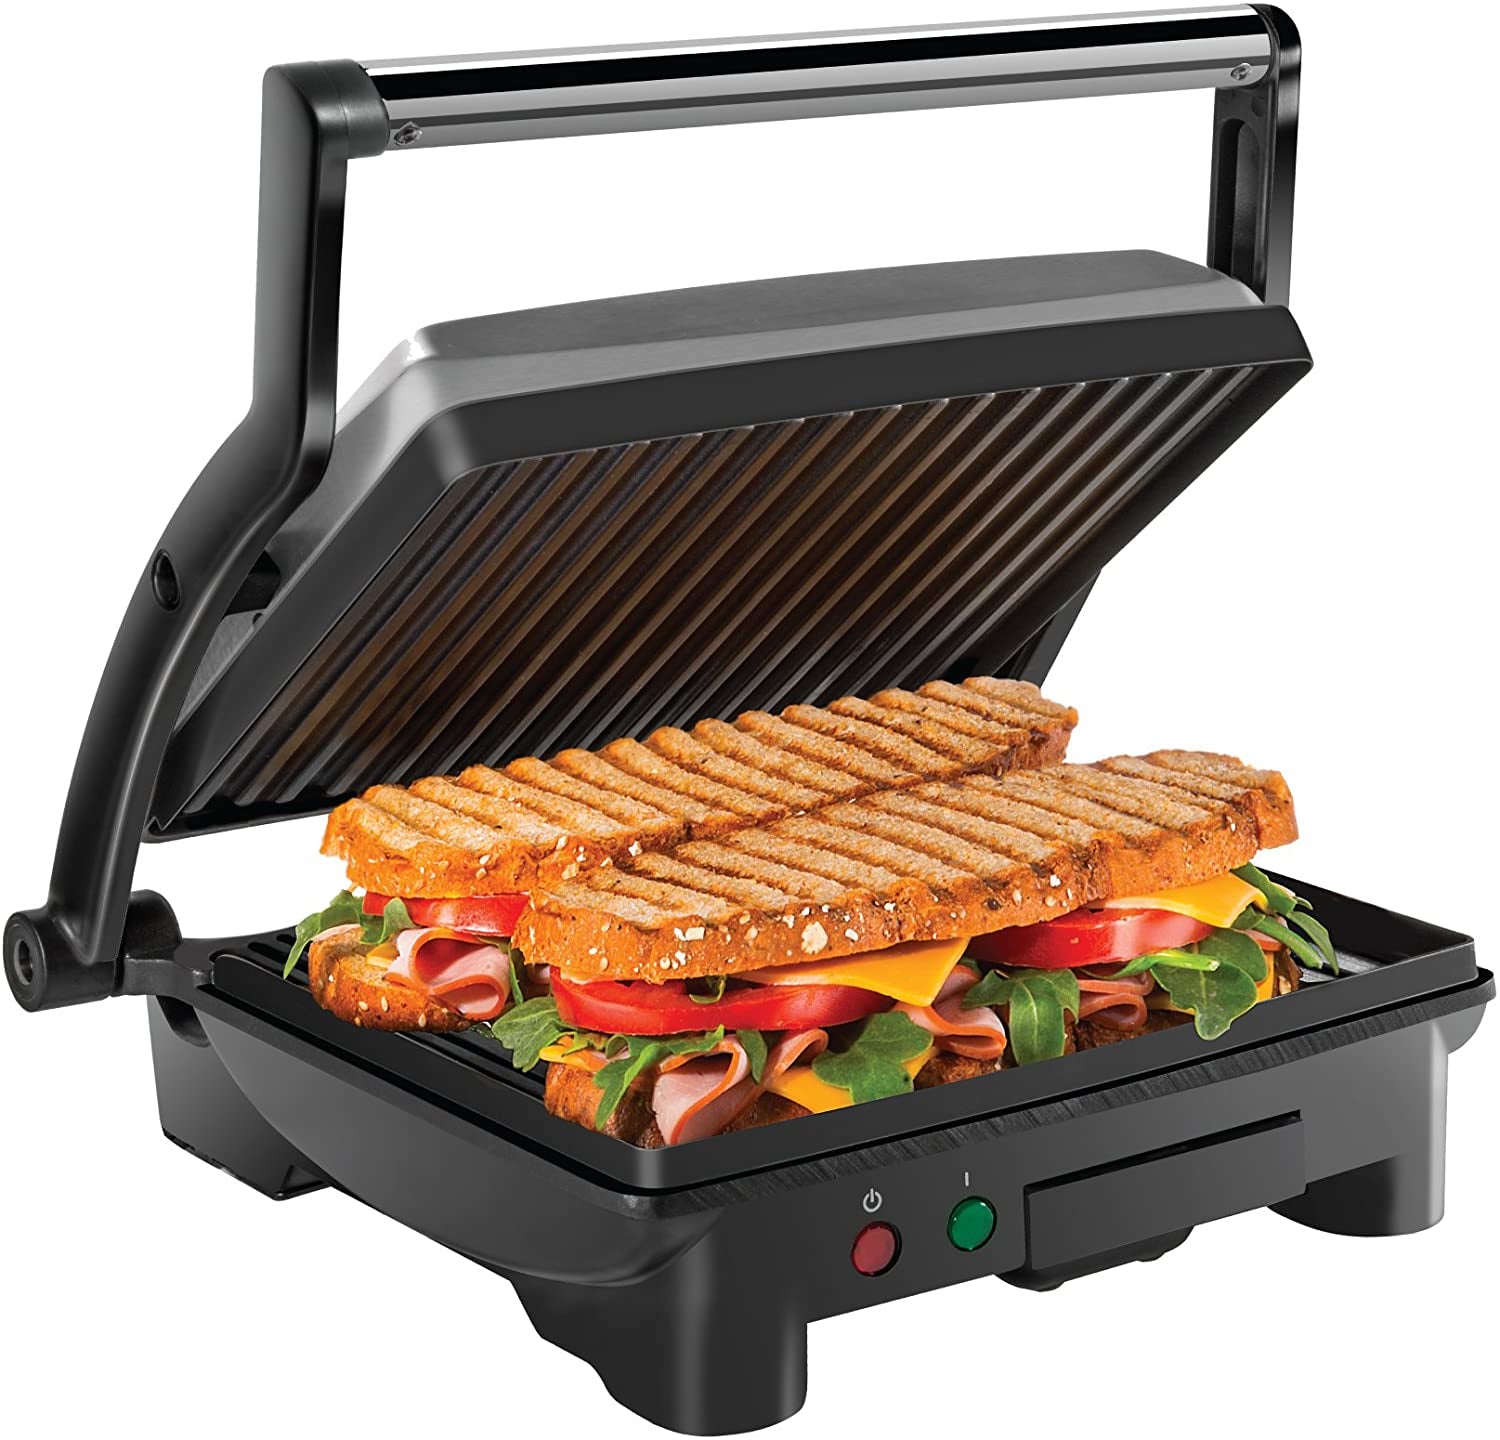 Panini Press Grill and Gourmet Sandwich Maker Non-Stick Coated Plates, Opens 180 Degrees to Fit Any Type or Size of Food, Stainless Steel Surface and Removable Drip Tray, 4 Slice, Black